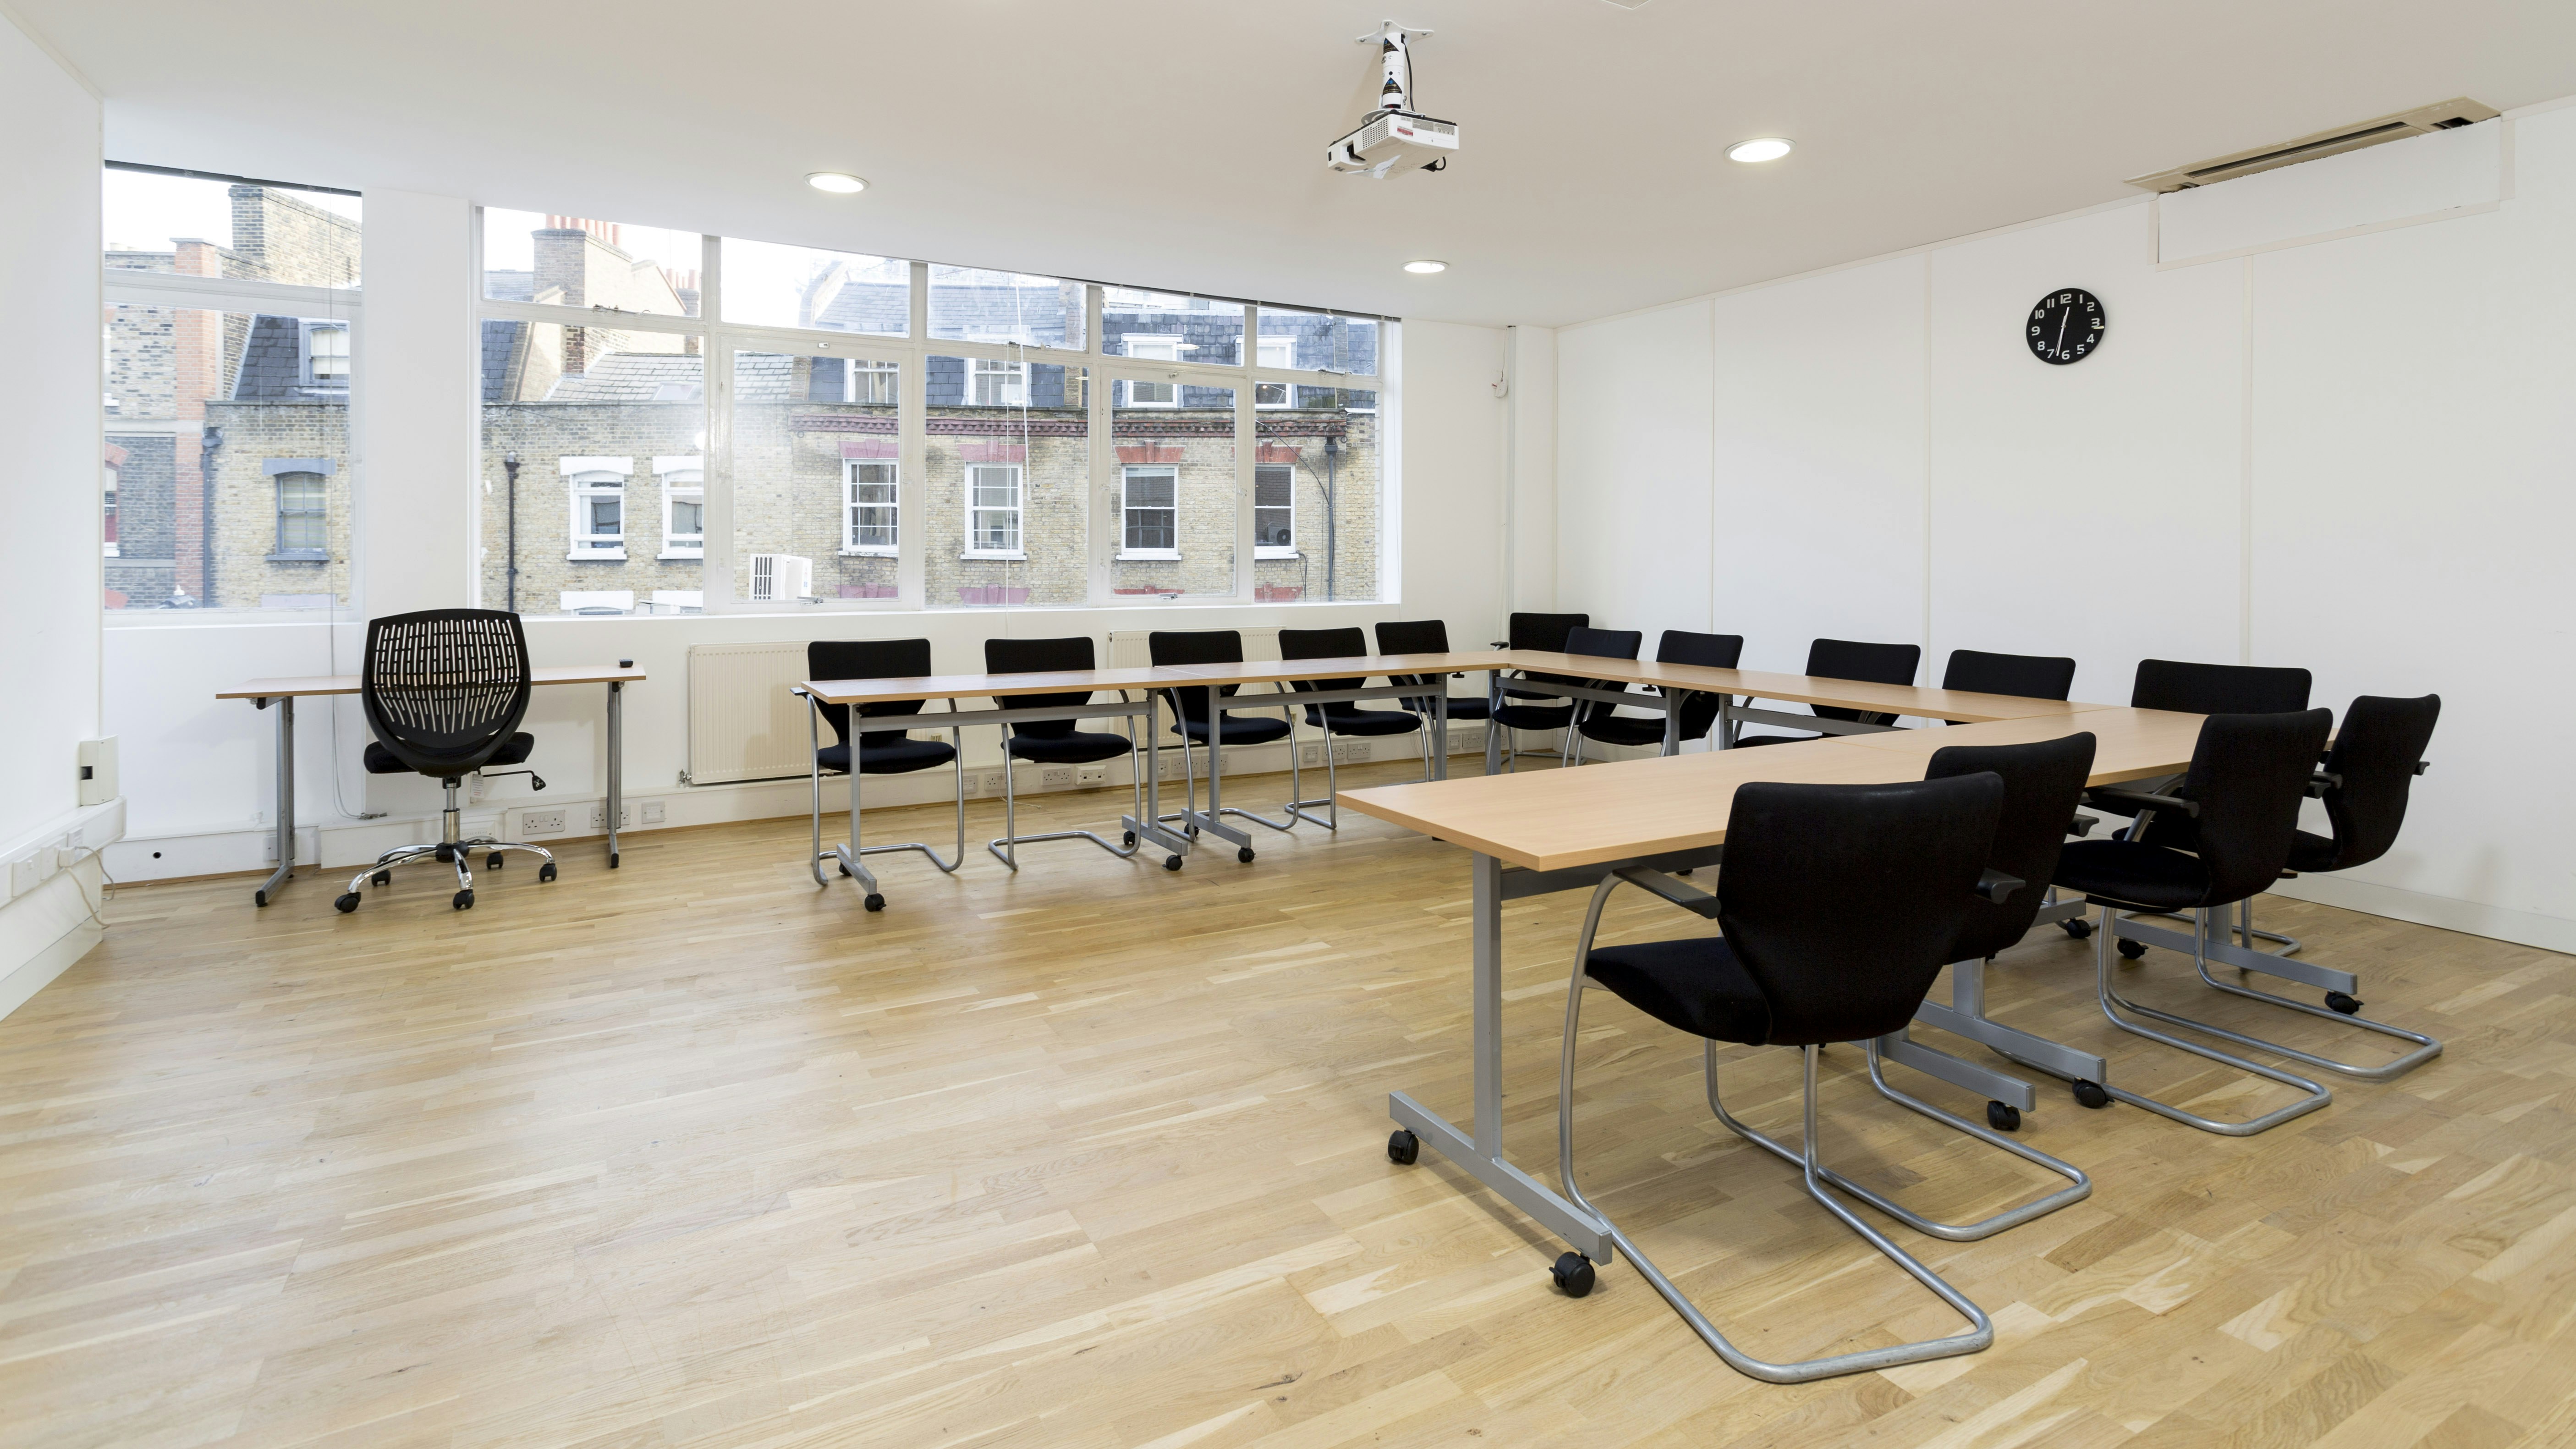 Meeting Rooms Venues in East London - The Training Room Hire Company